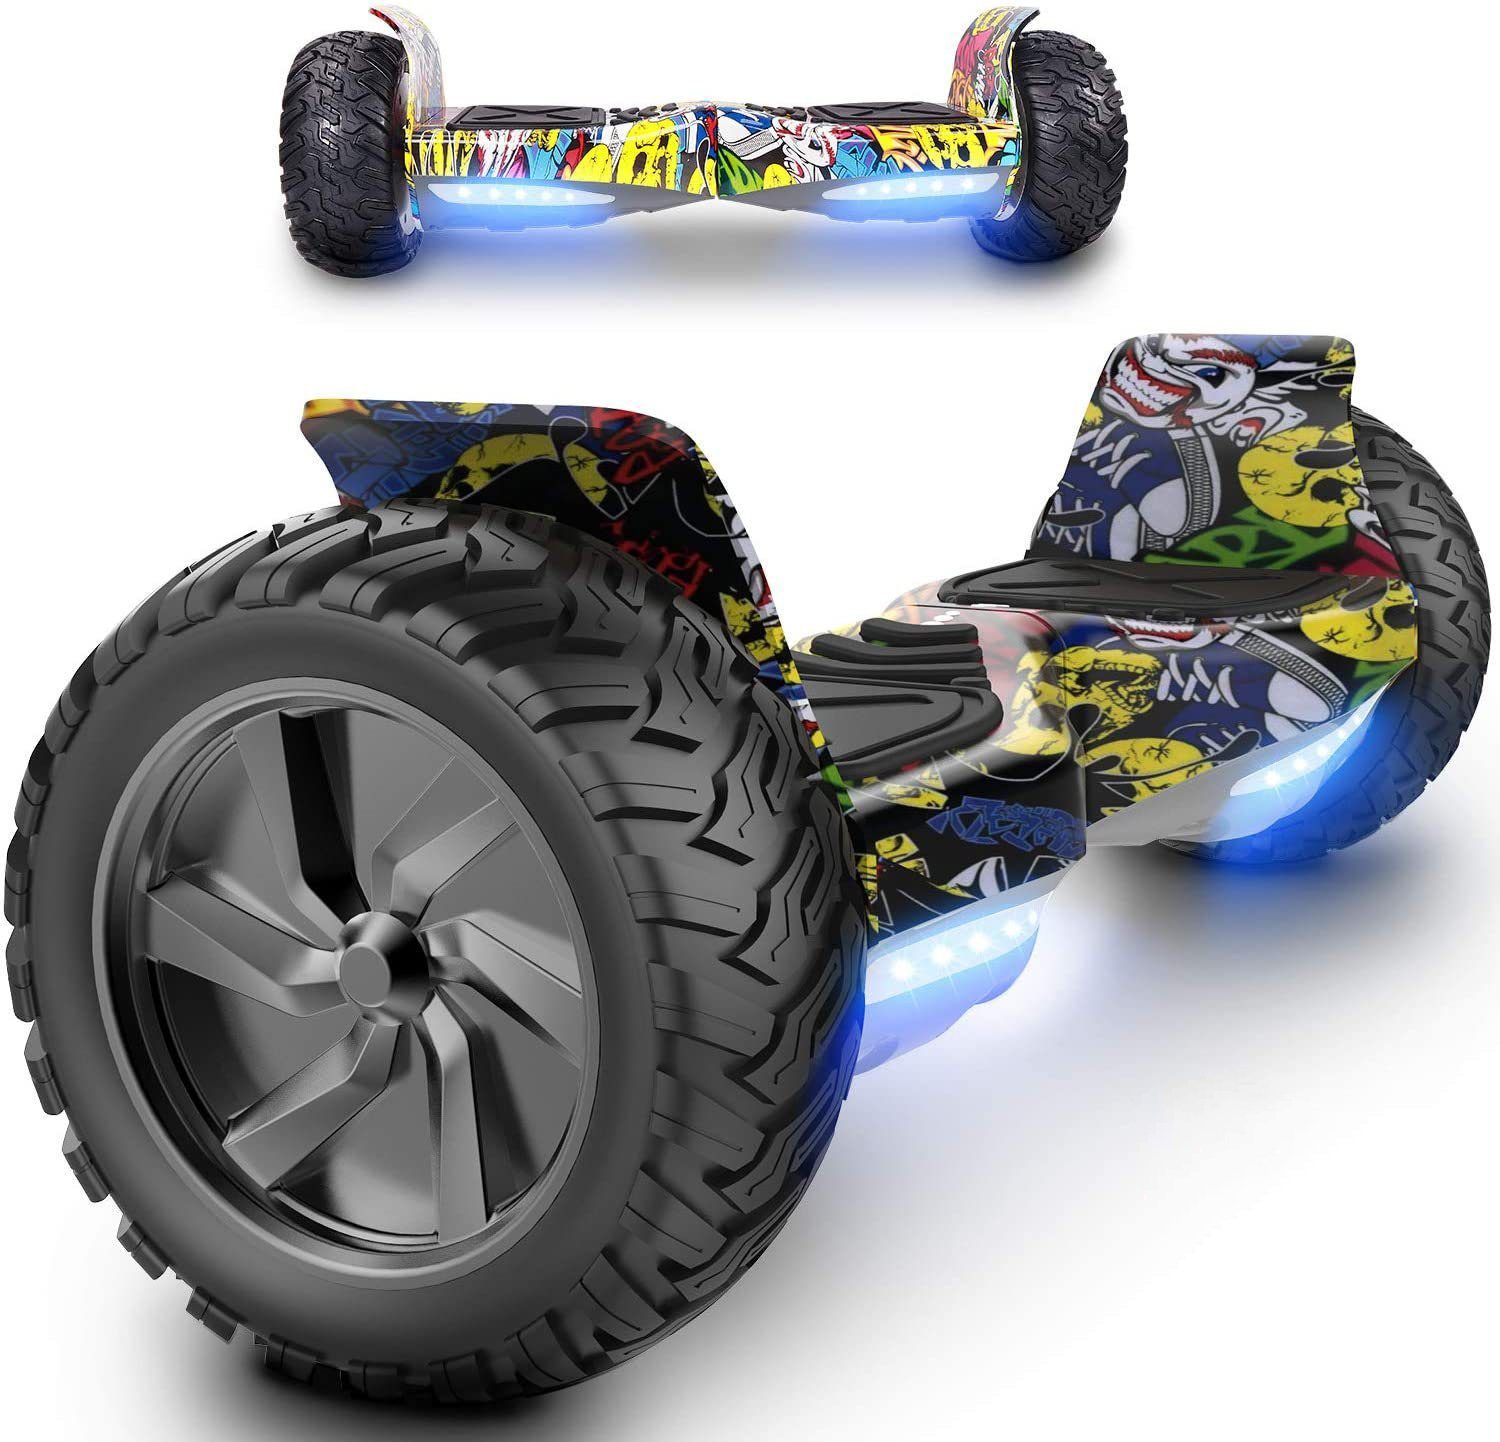 HM2 mit Balance SUV-Hoverboard Hippop) Zoll, Board APP (8,5 RCB